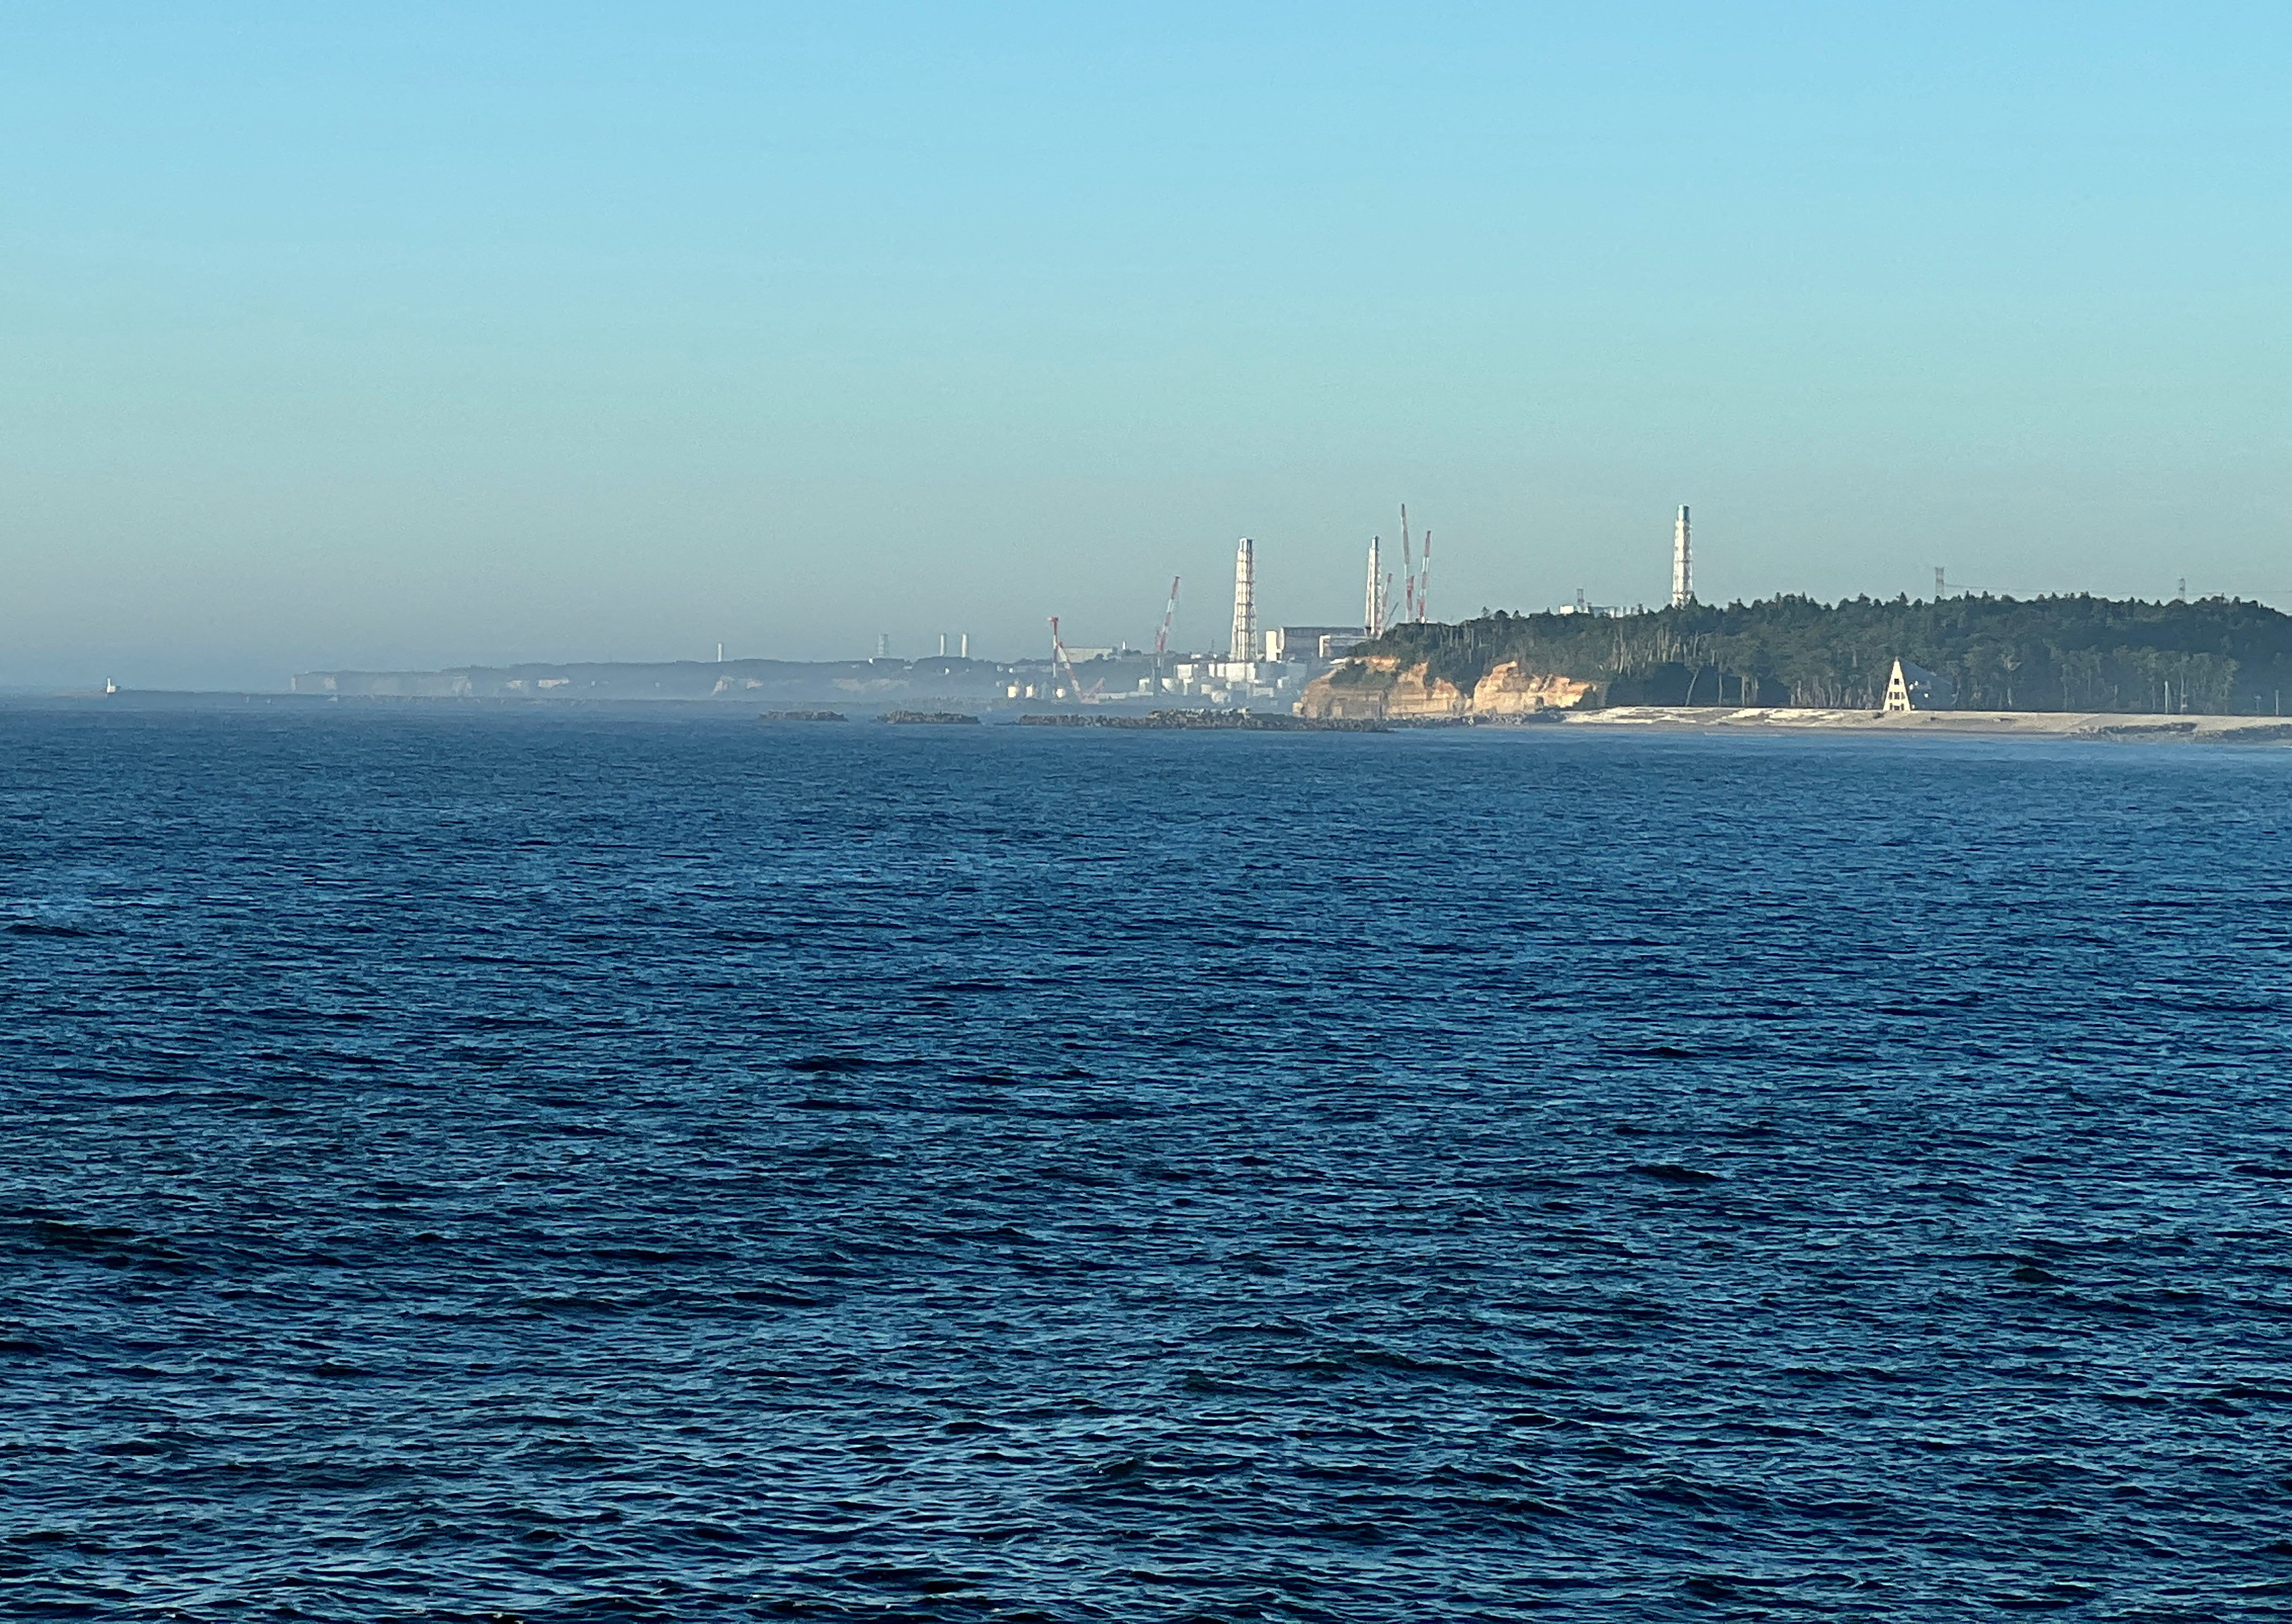 A view of the Fukushima Daiichi Nuclear Power Plant from the nearby fishing port of Okido in the town of Nami